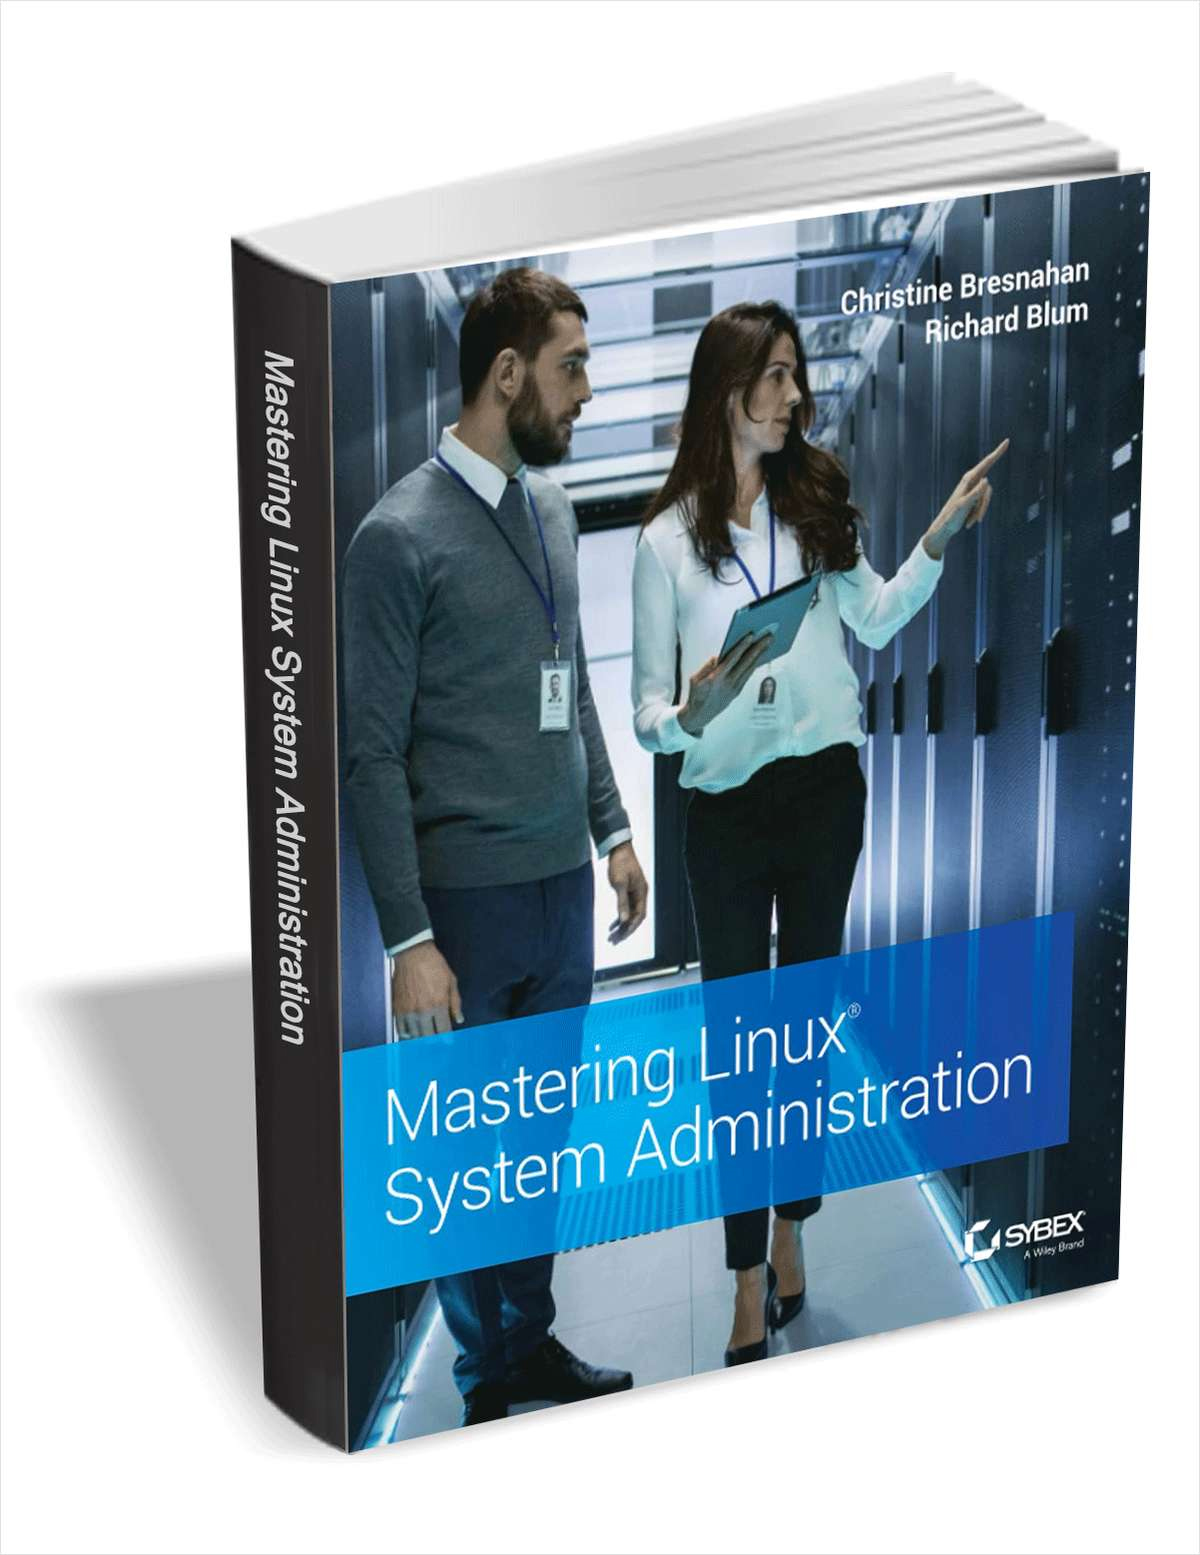 Mastering Linux System Administration ($30.00 Value) FREE for a Limited Time Screenshot